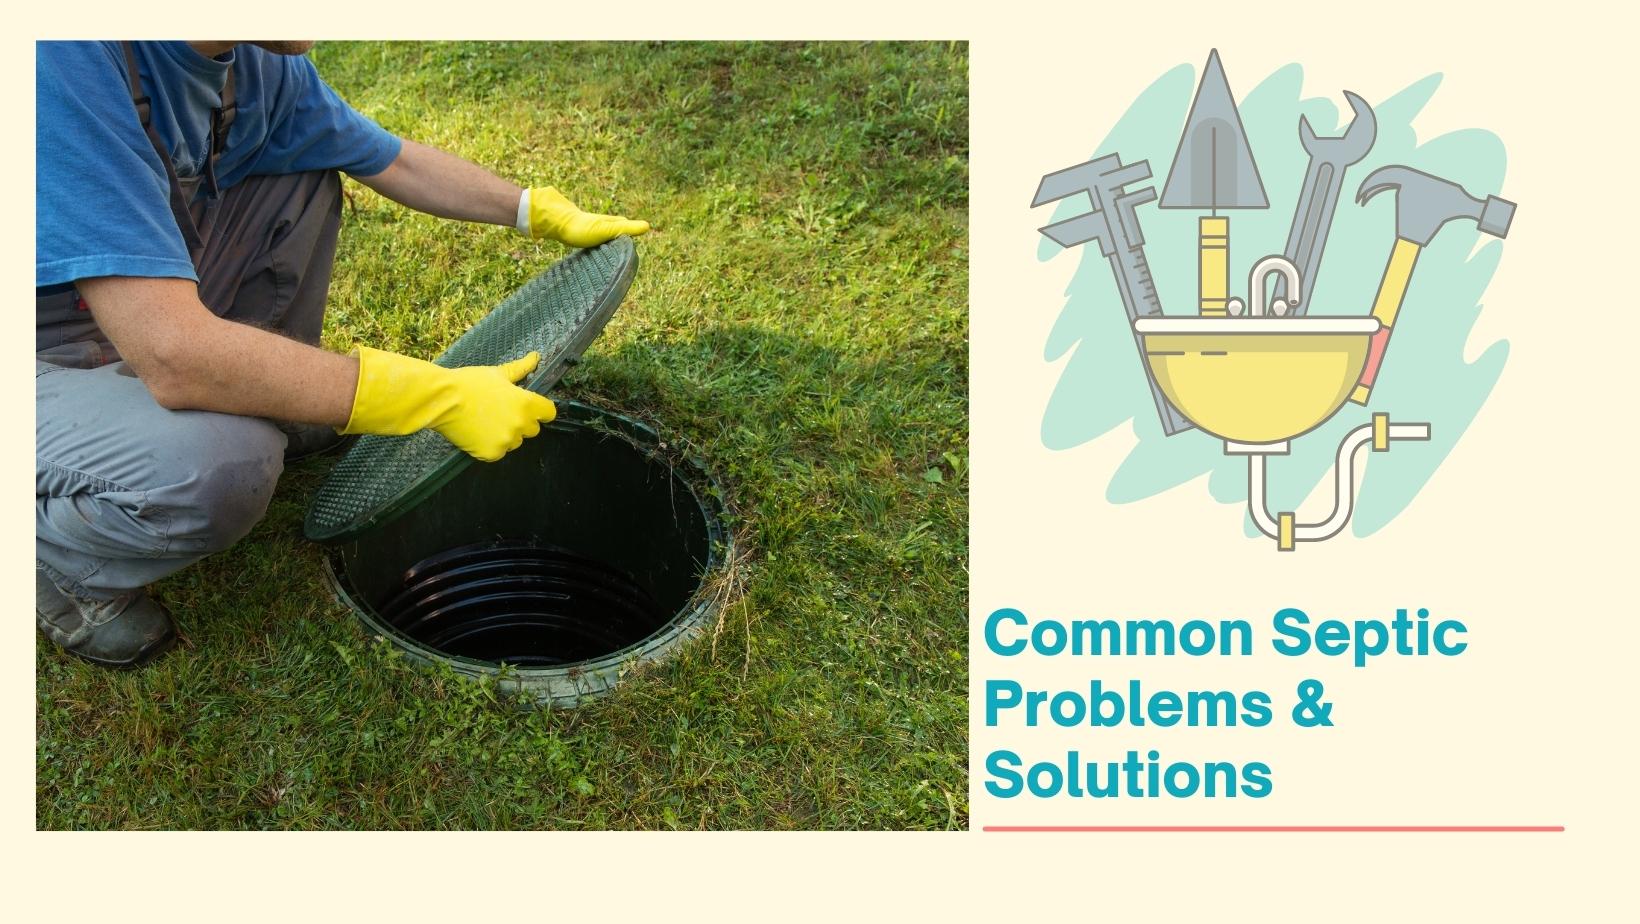 Common Septic Problems & Solutions